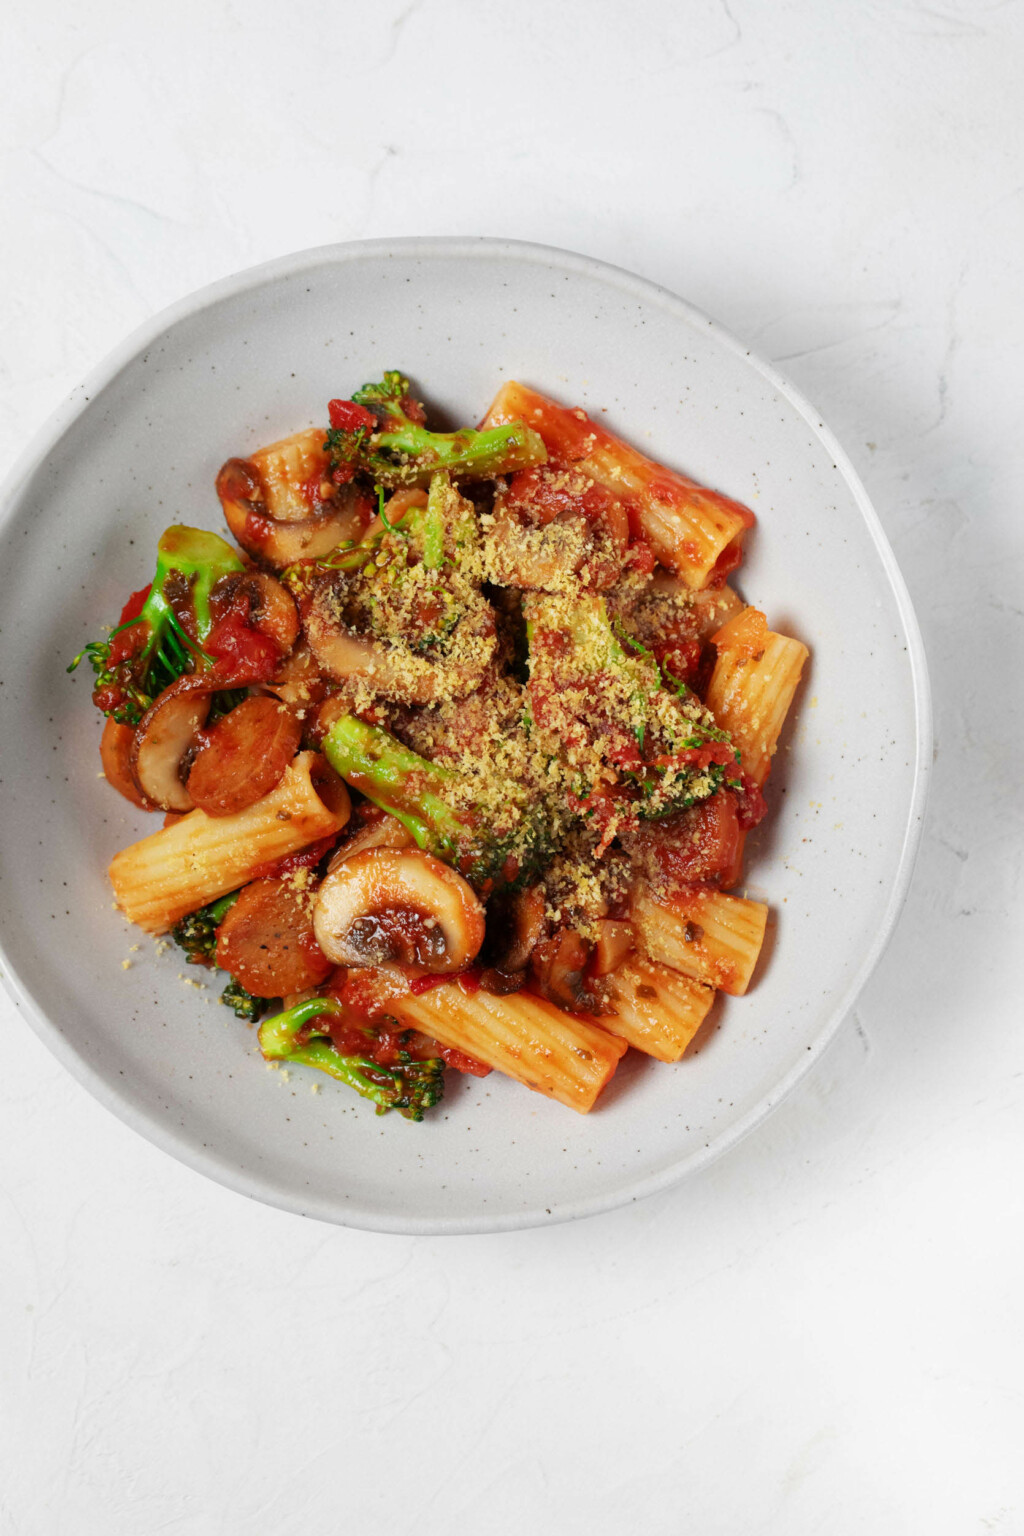 An overhead image of a white bowl, which is filled with a vegan pasta dish made with plant-based sausage, broccoli, and marinara sauce.